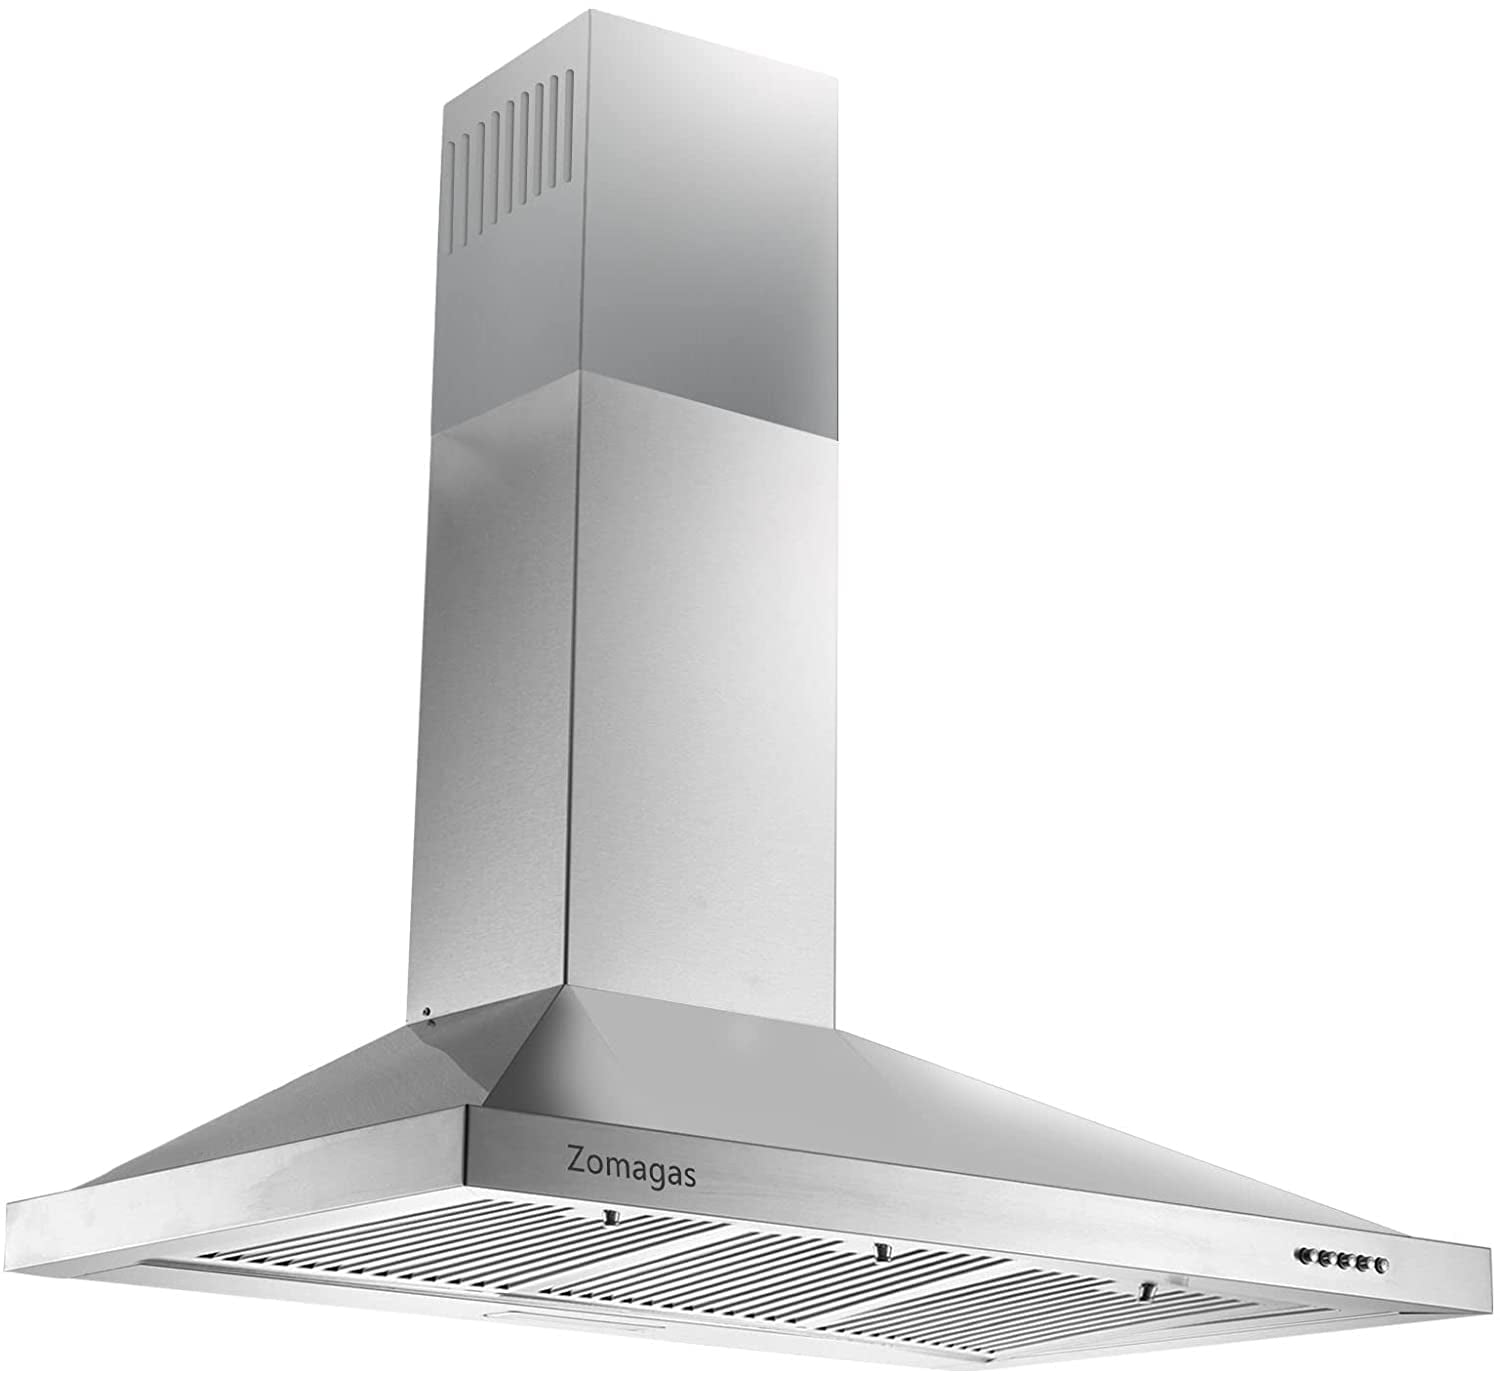 Range Hood 36-inch Wall Mount Vent Hood Stainless Steel Ducted